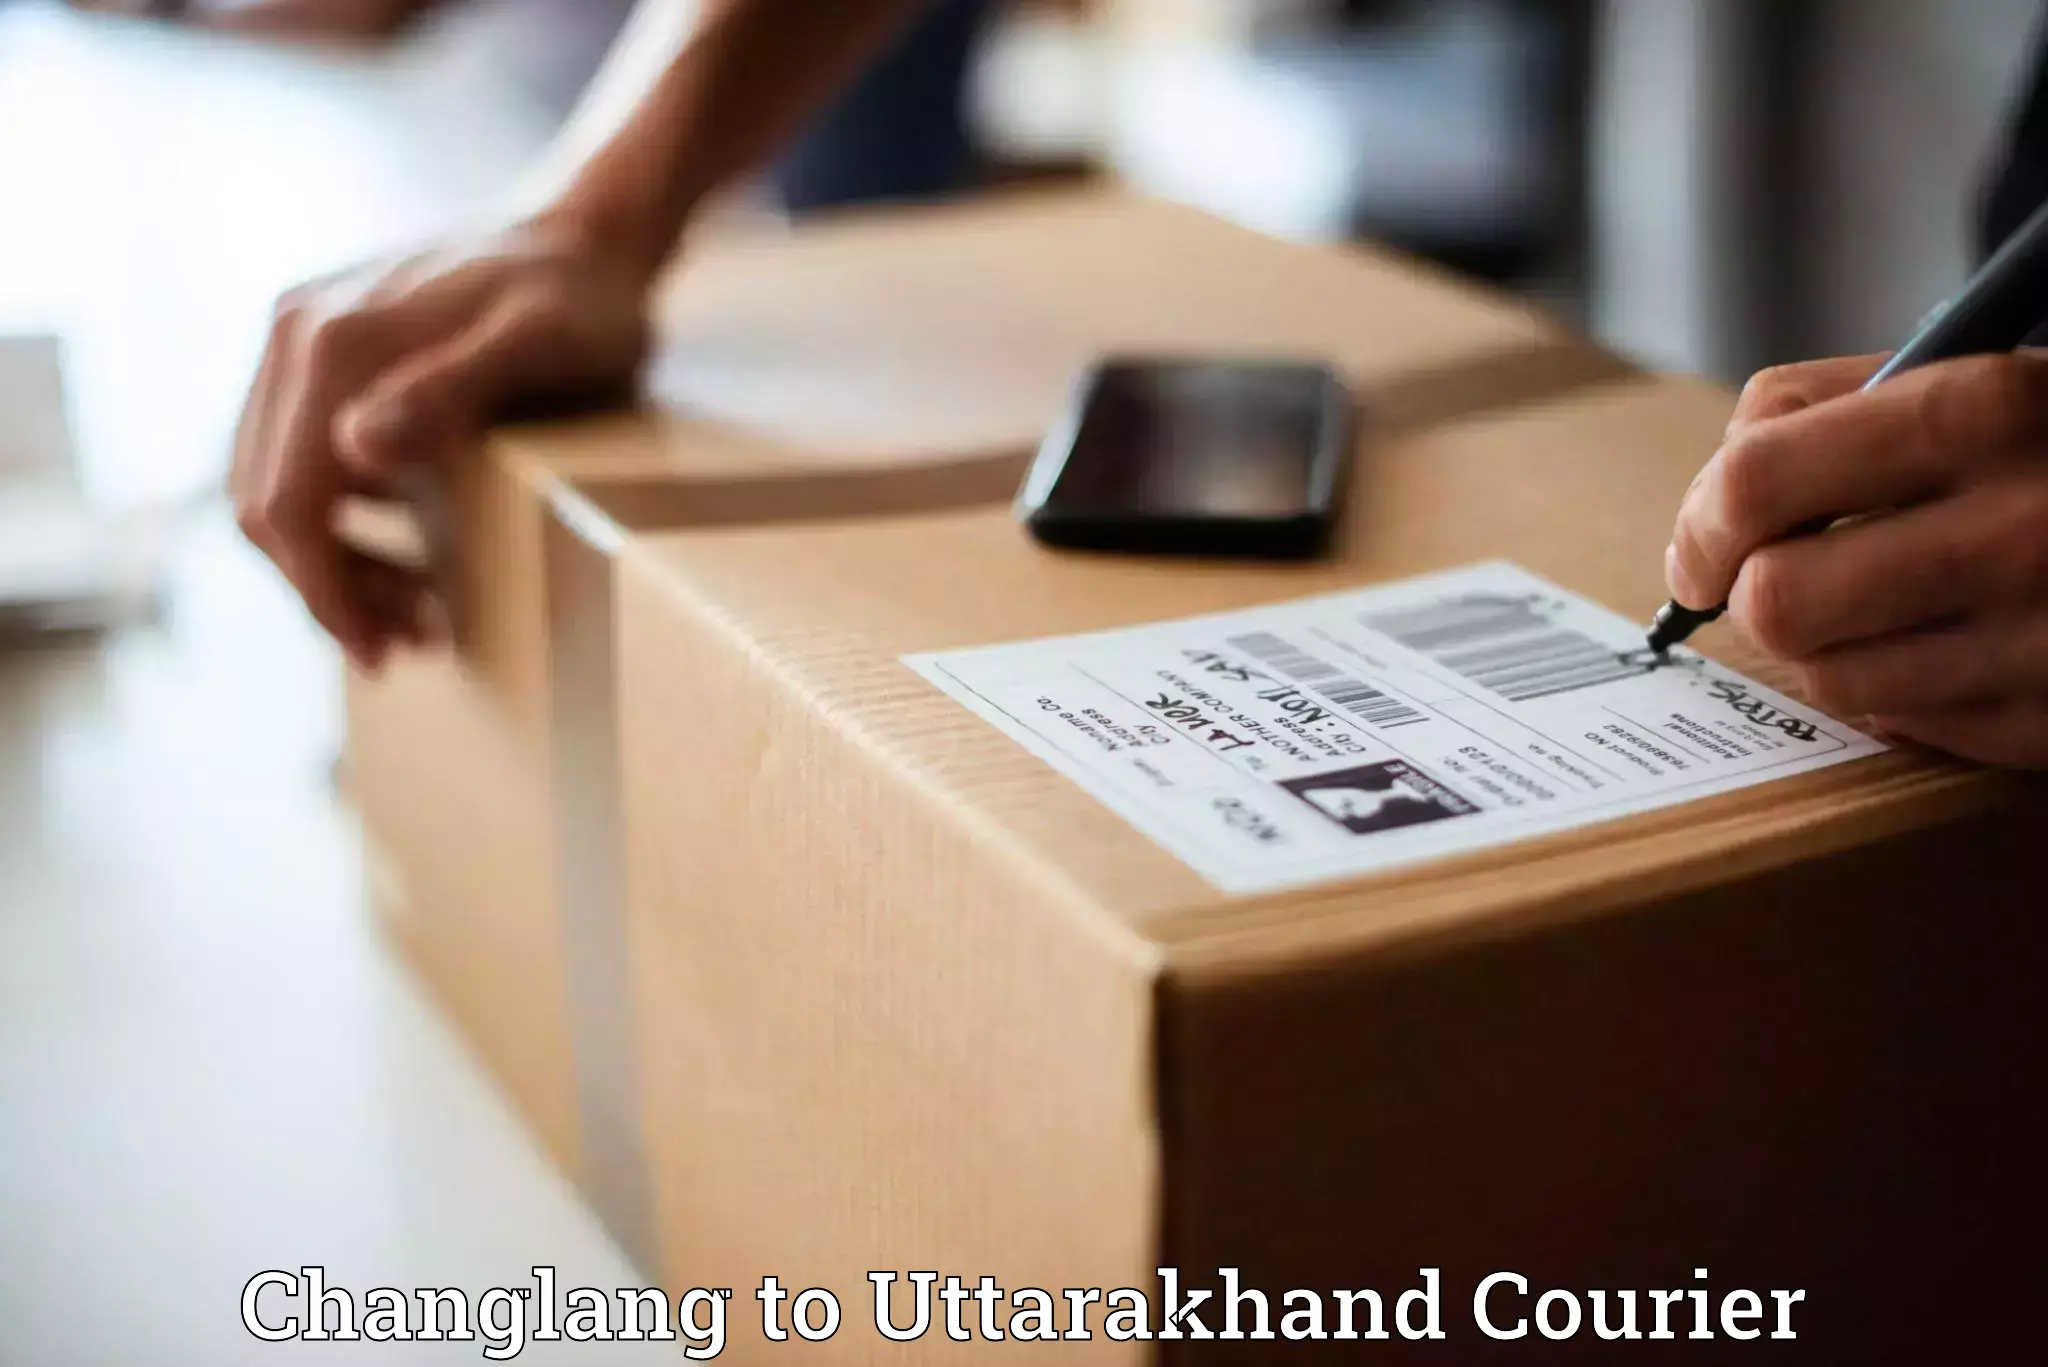 Parcel handling and care Changlang to Pithoragarh